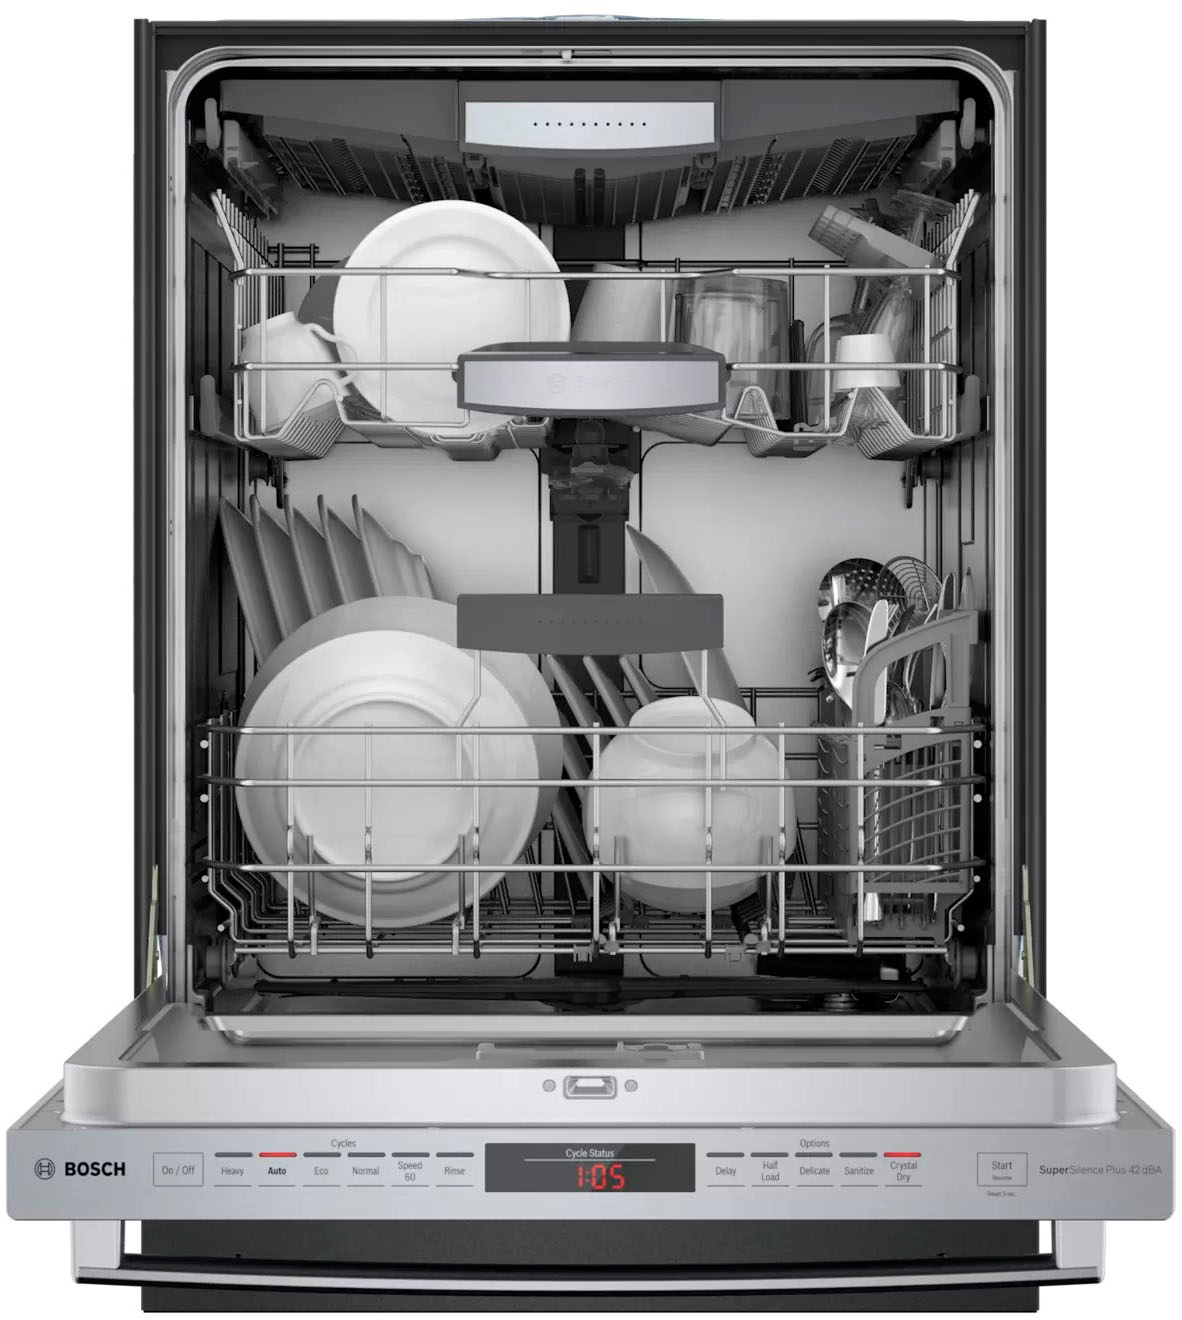 Bosch 800 Series 24 Dishwasher with Stainless Steel Tub